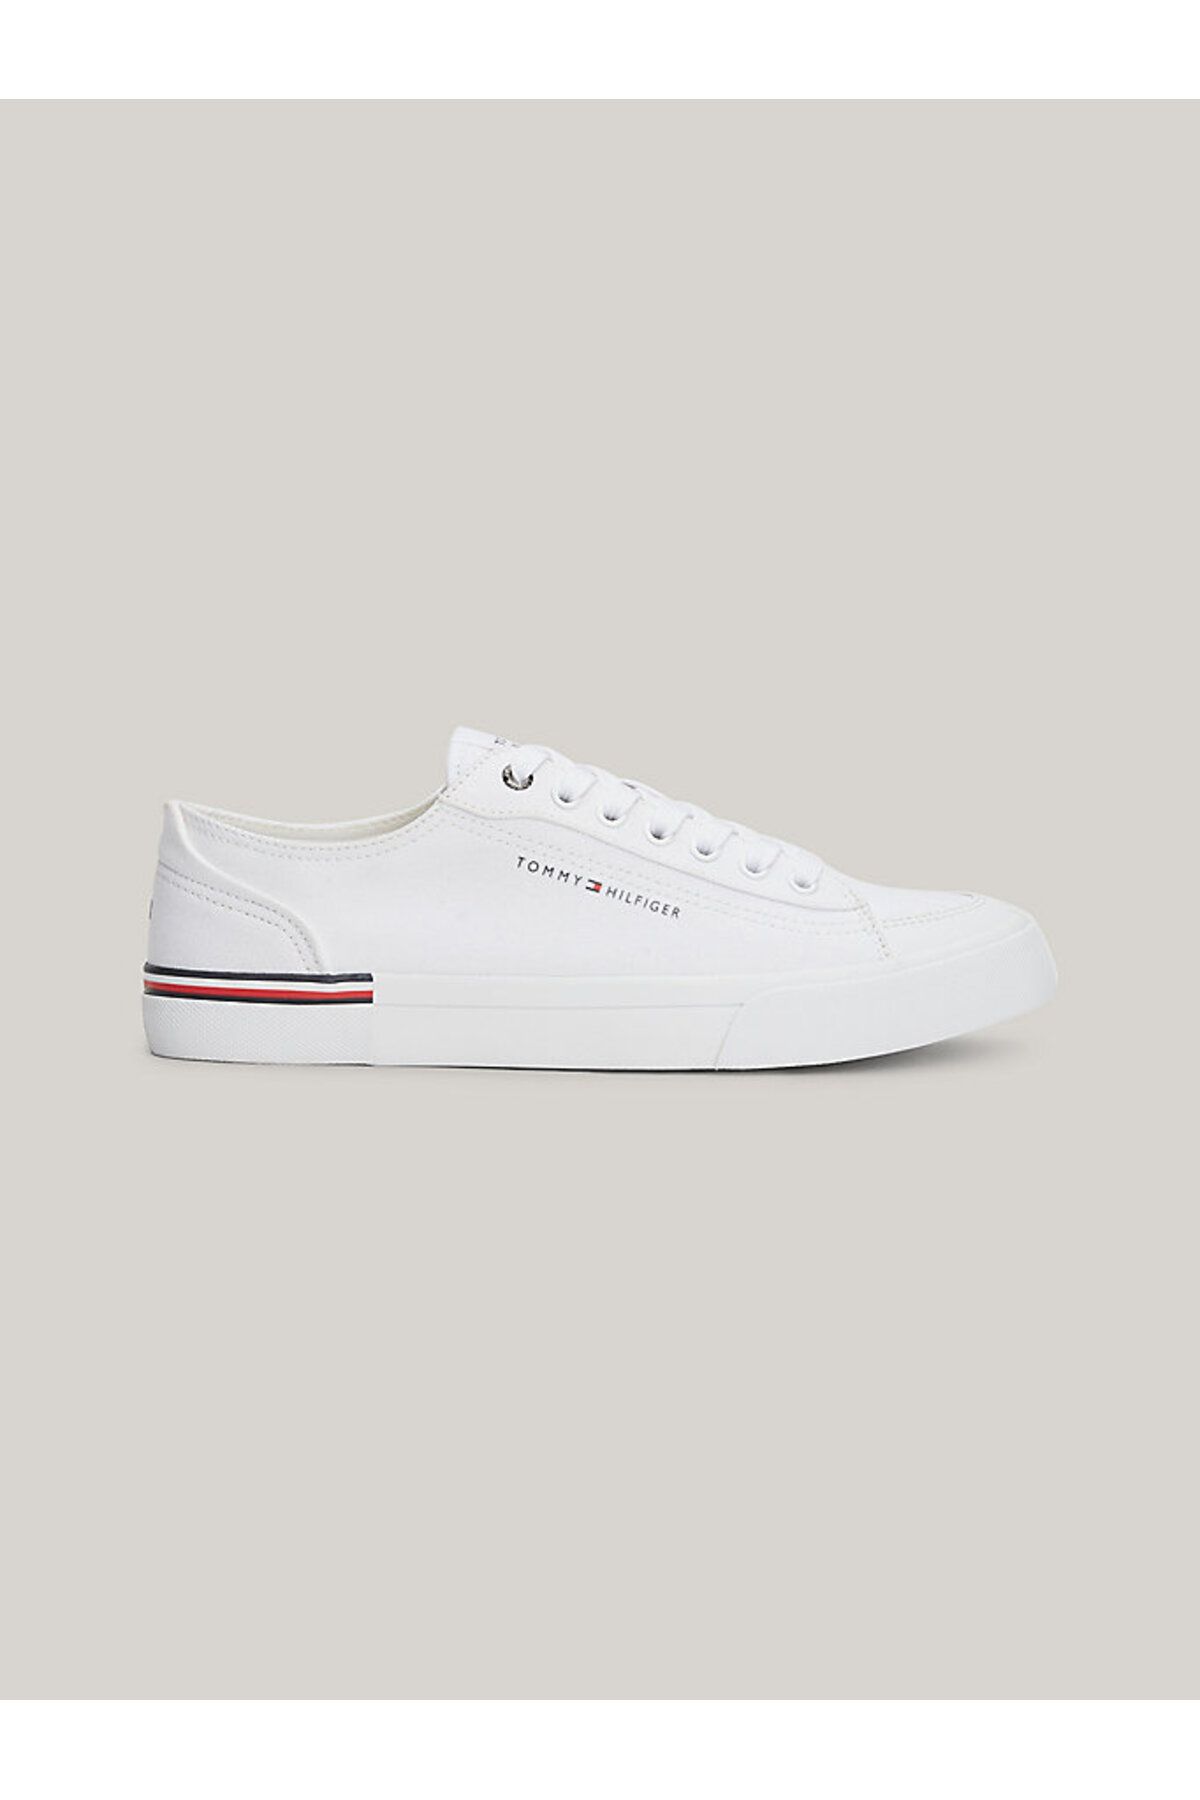 Tommy Hilfiger CORPORATE VULC CANVAS